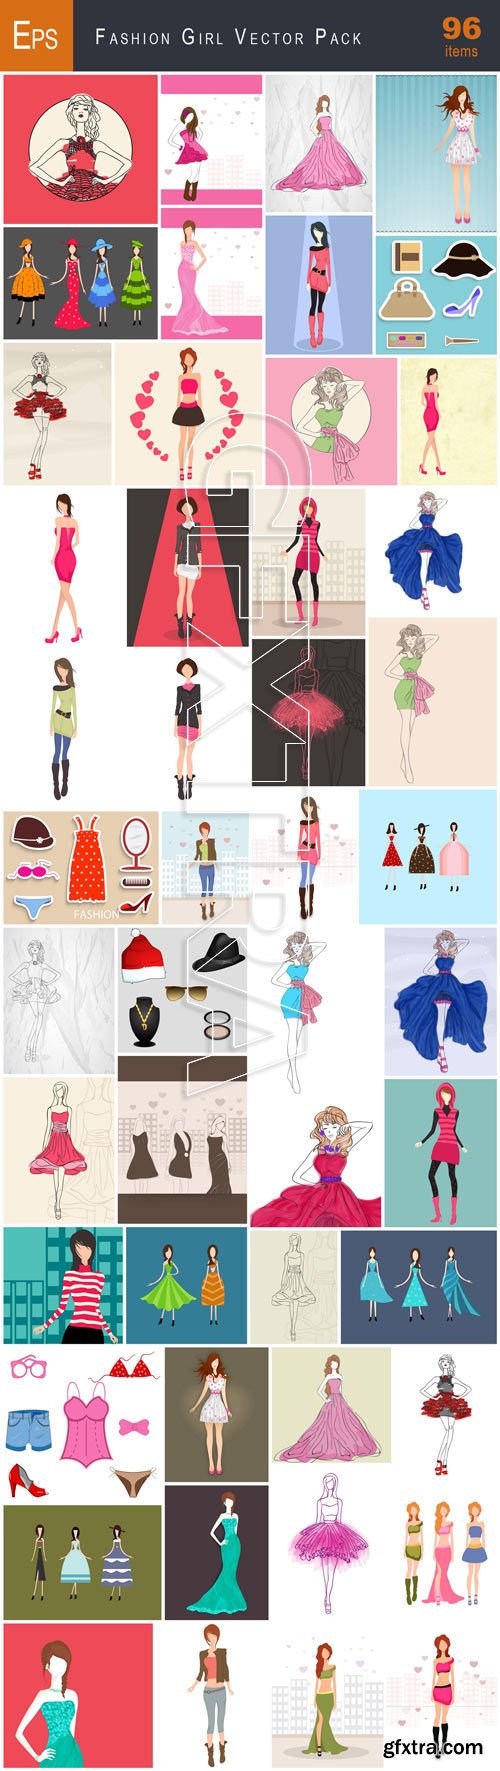 VectorCity Fashion Girl Vector Pack